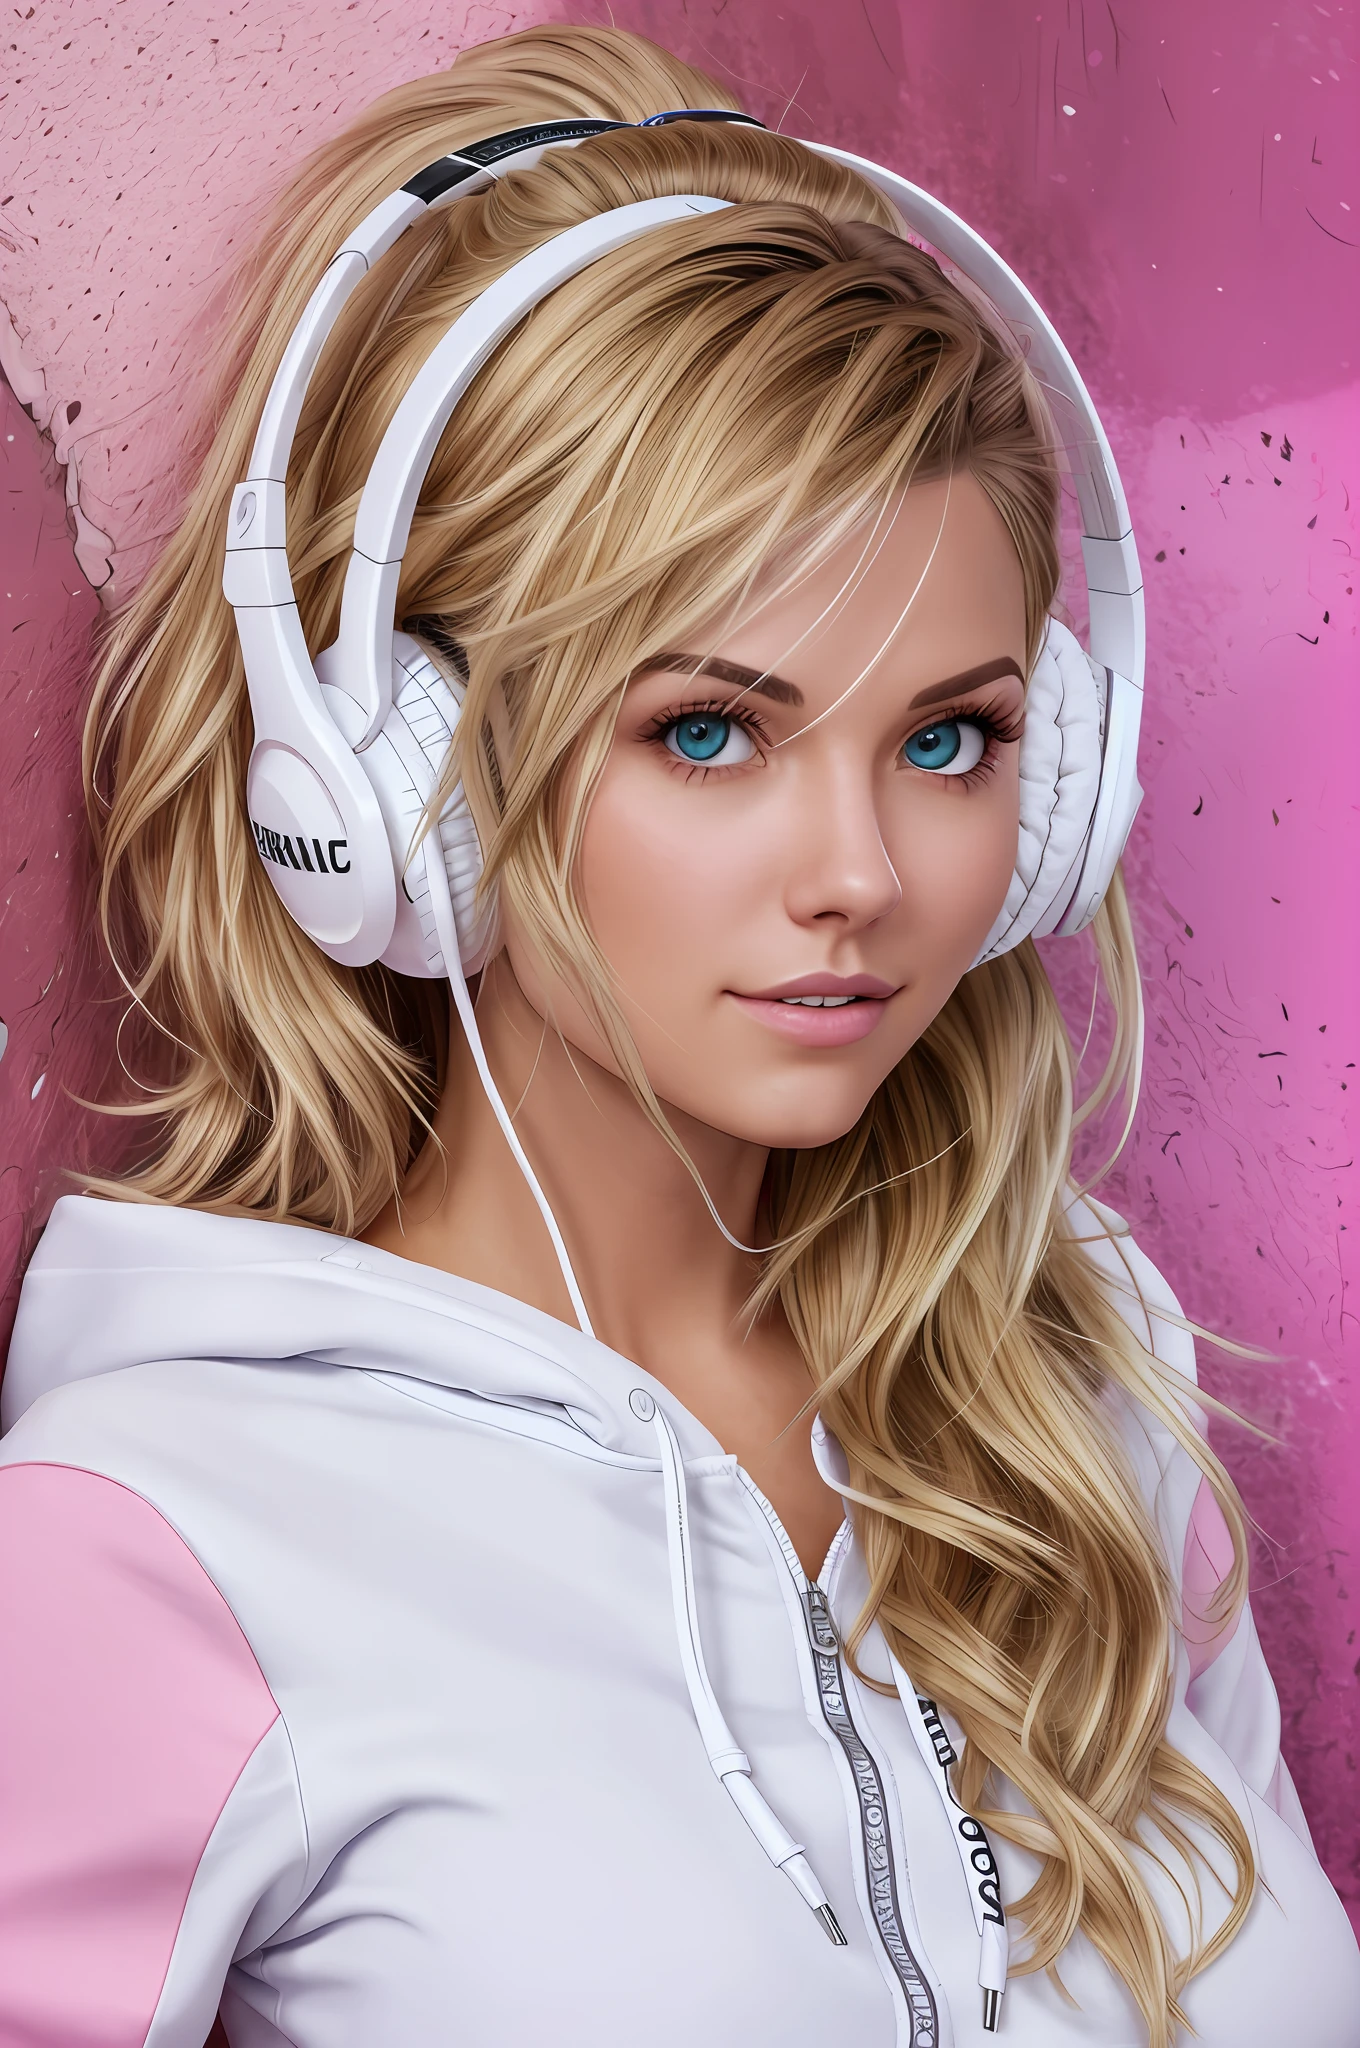 blonde gamer girl leaning into the camera, photo from front above, red hoodie, layered clothes, large white gamer headphones, large breasts, skintight white top:1.2, cleavage, pink bra:1.2, looking at viewer, soft colors, cinematic lighting, perfect anatomy:1.3, ikea furniture